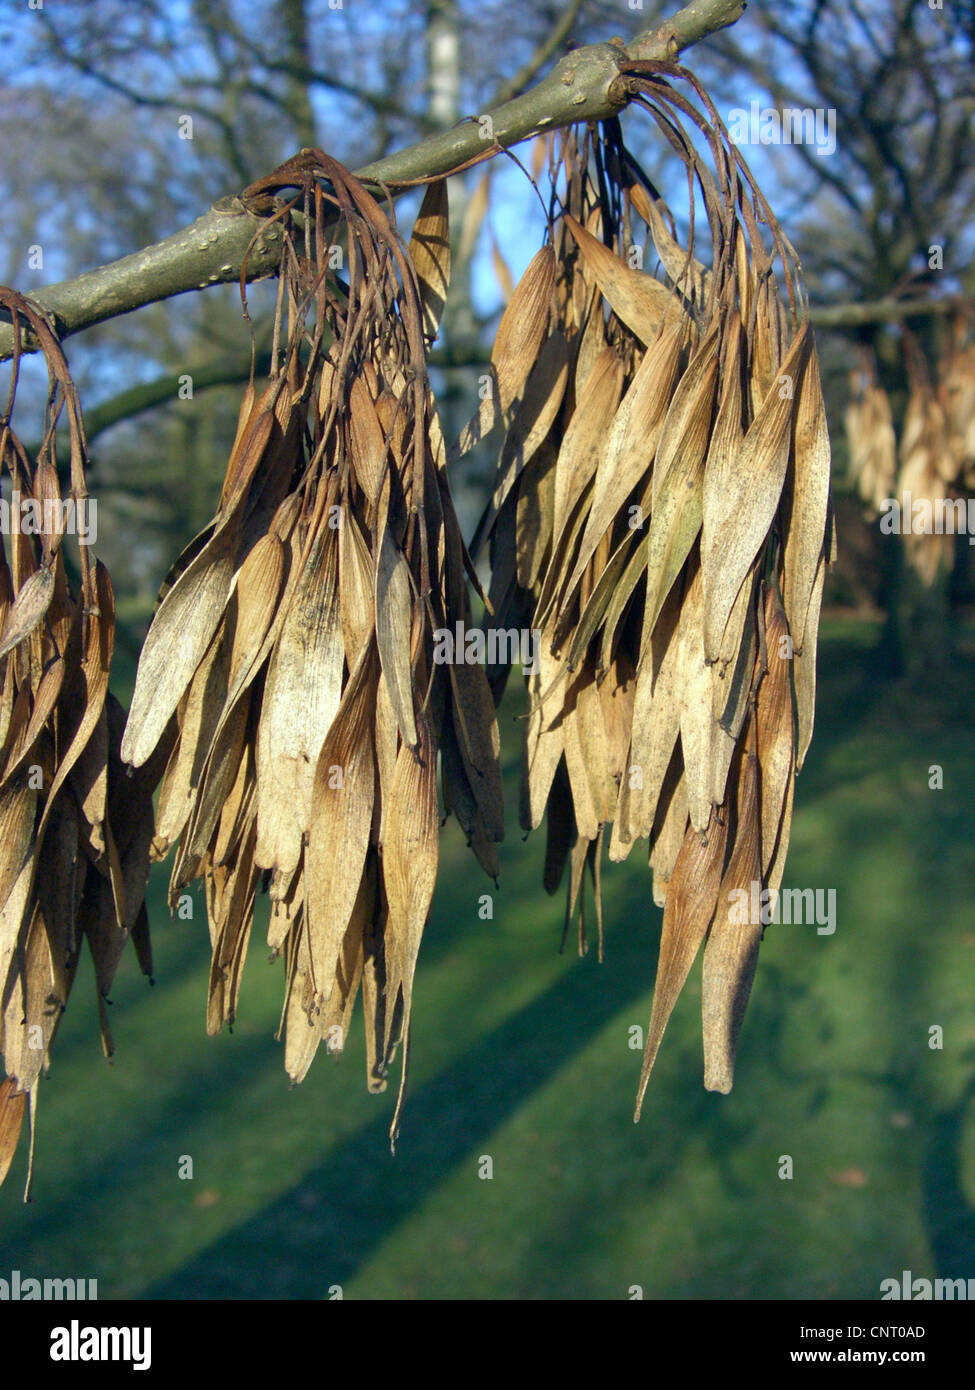 common ash, European ash (Fraxinus excelsior), fruits in winter, Germany Stock Photo